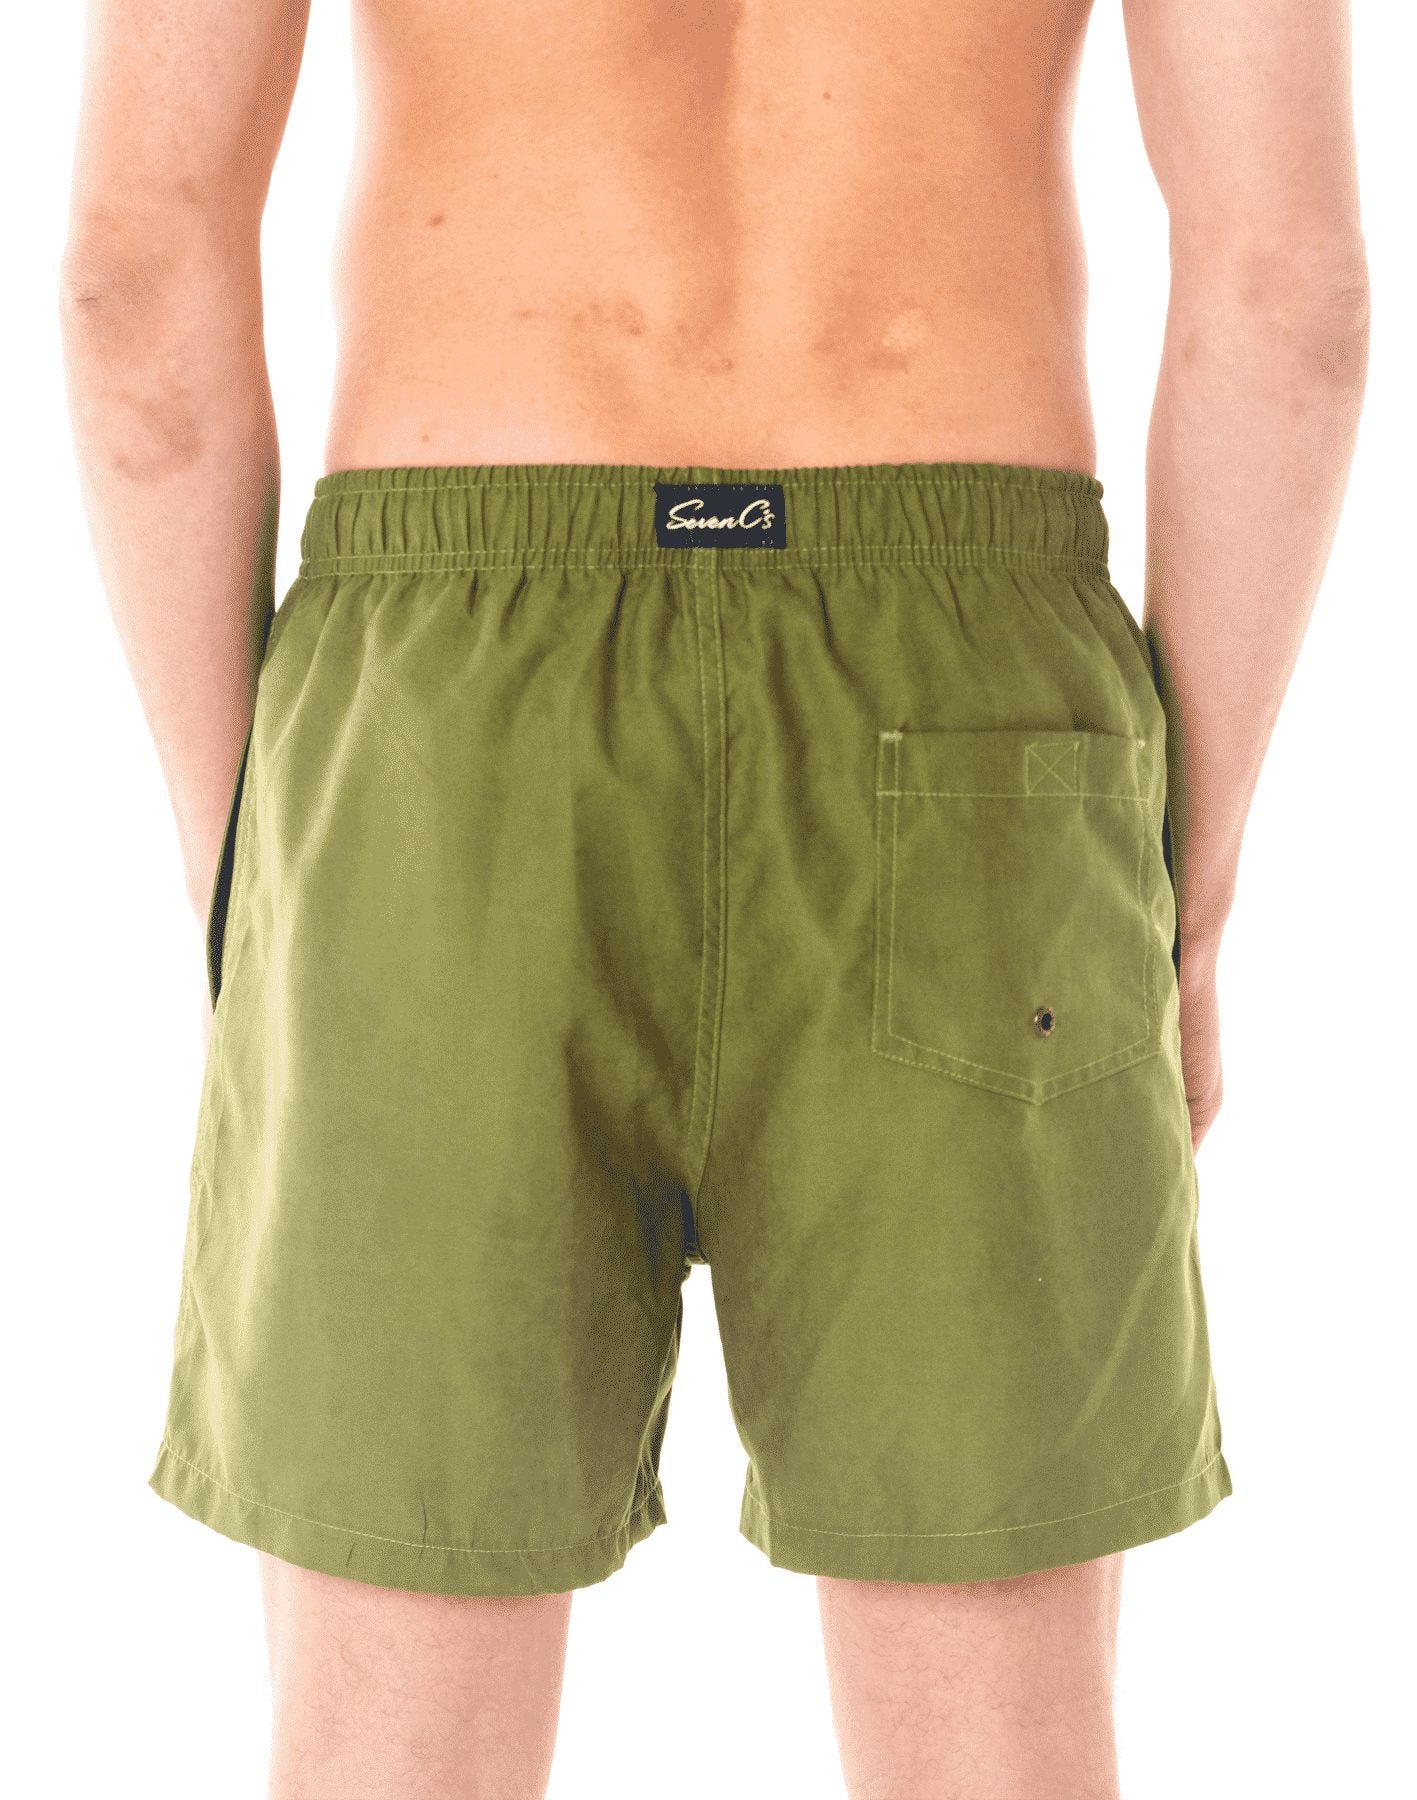 Eco-Friendly Olive Men's Shorts by SevenC's - Back View